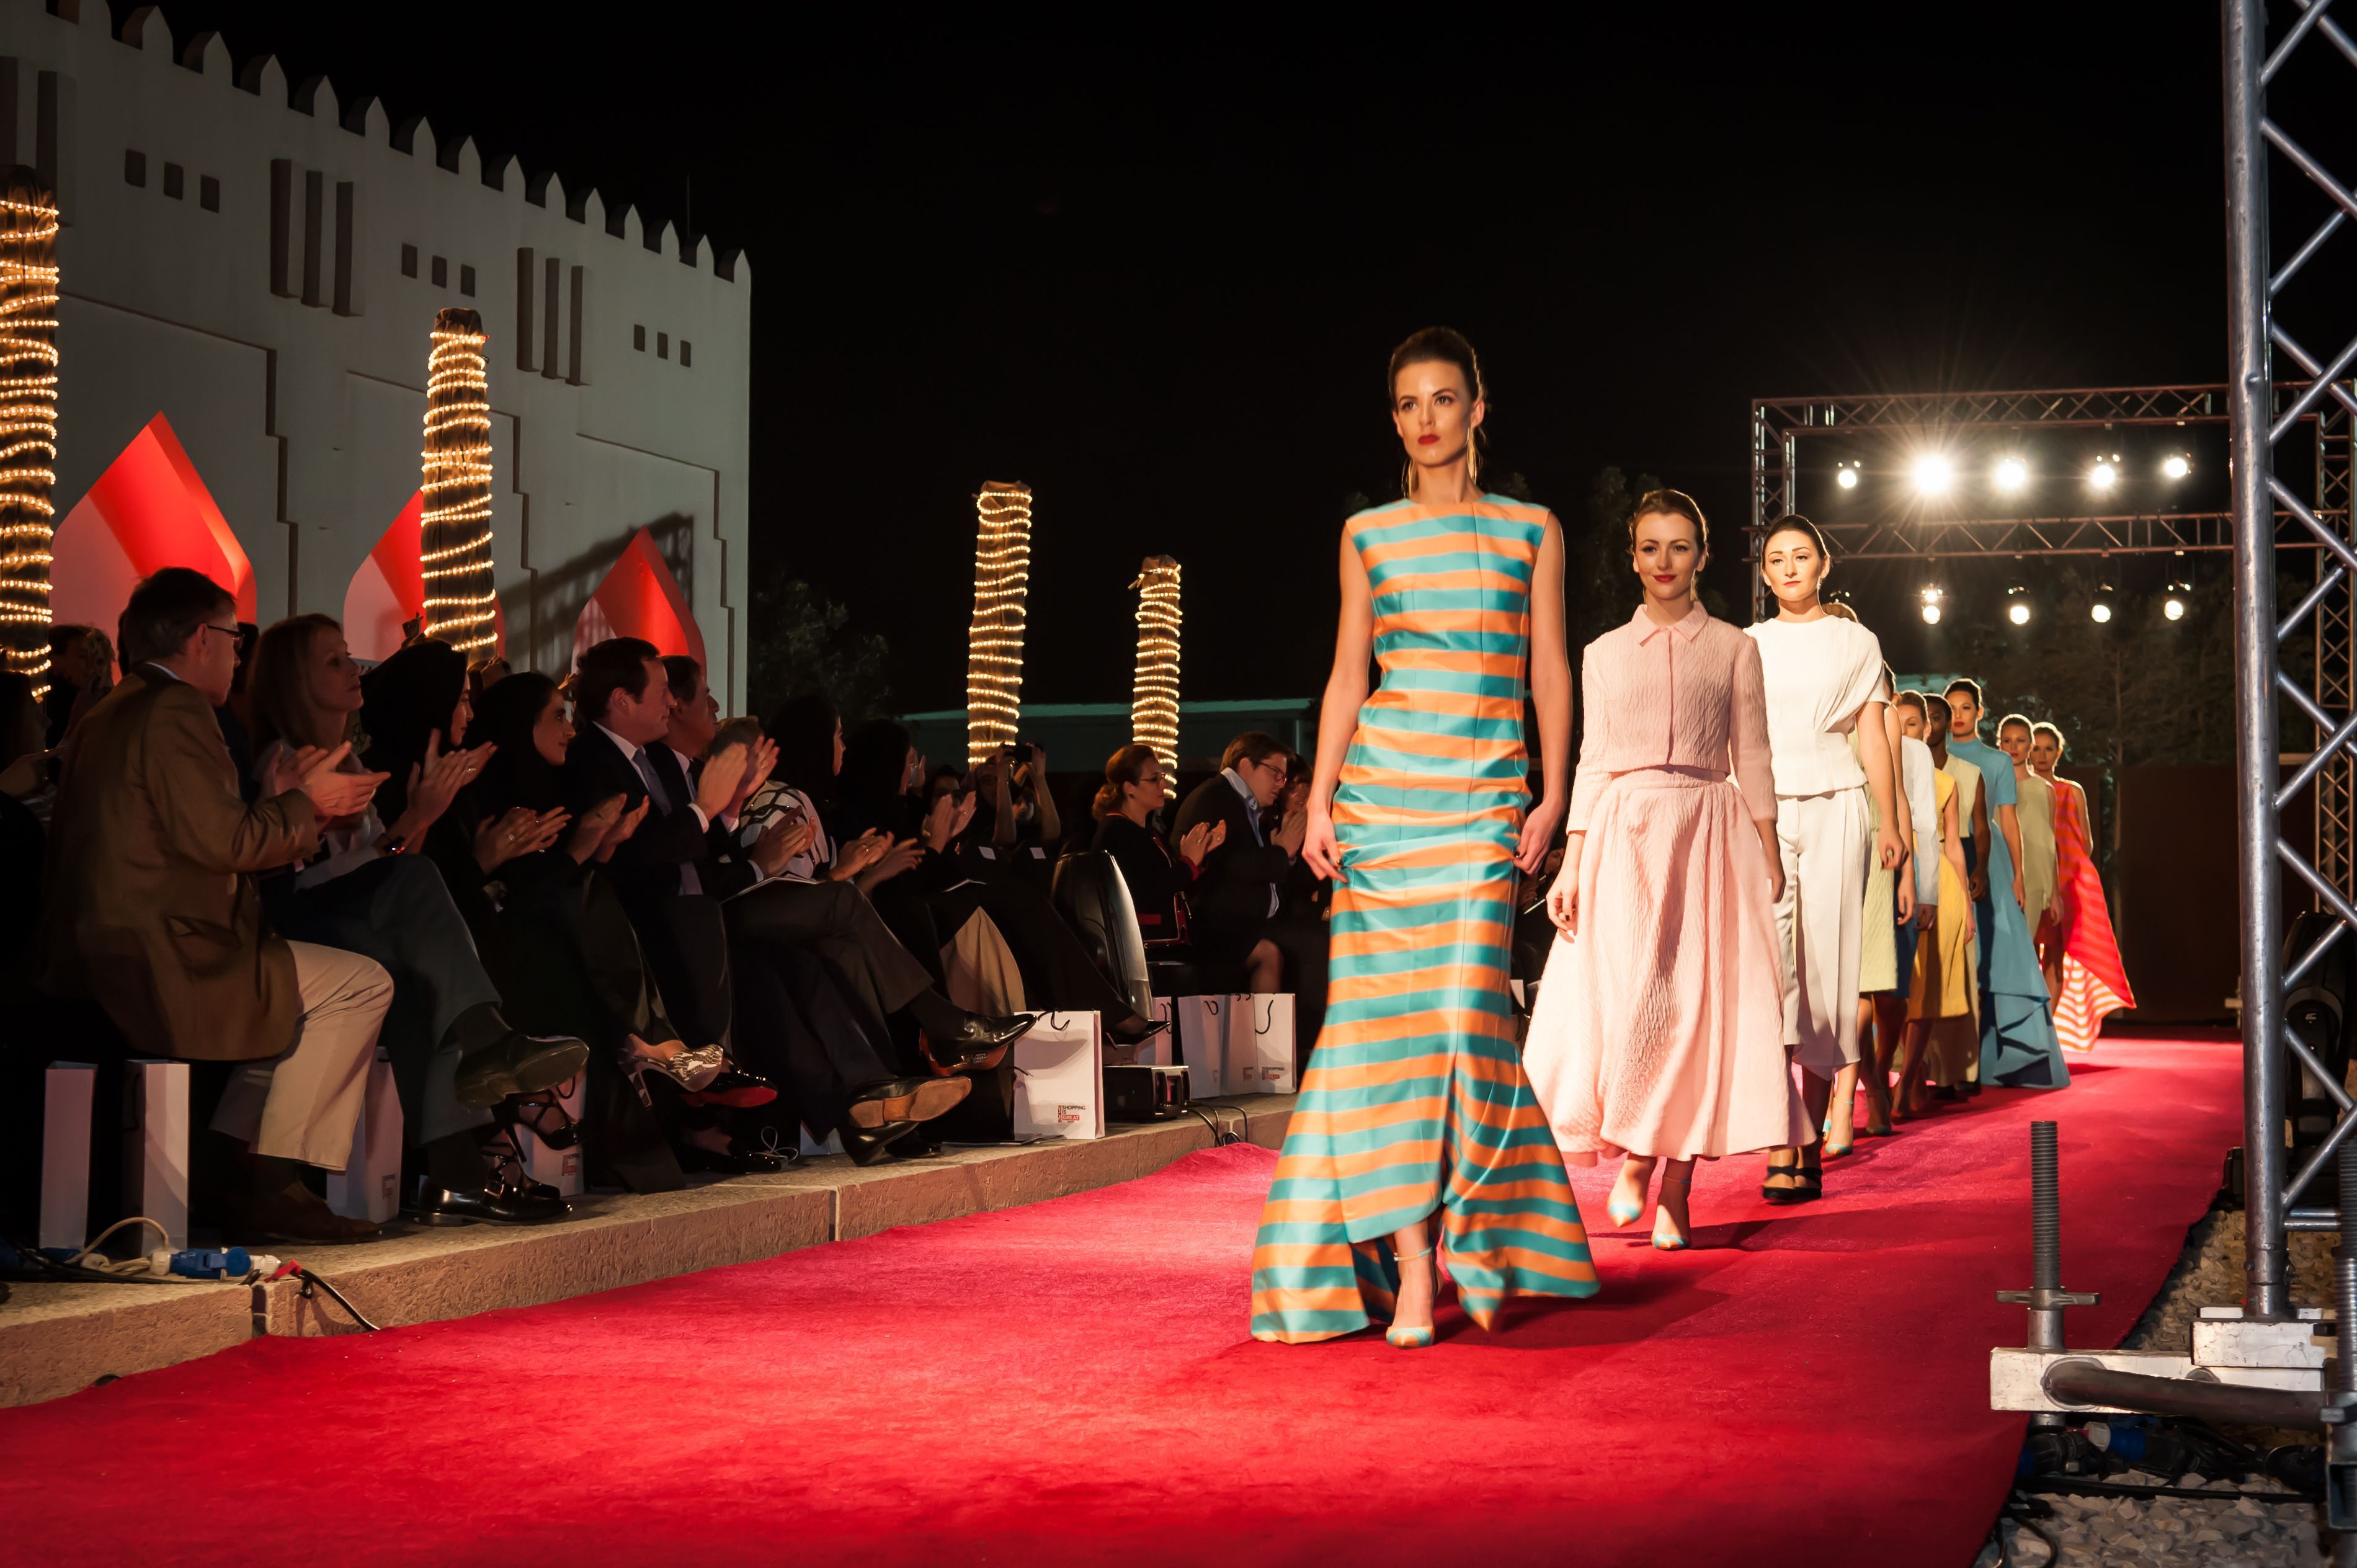 Models wearing evening dresses walk on a red catwalk during the Qatar - UK 2013 Fashion Exchange.